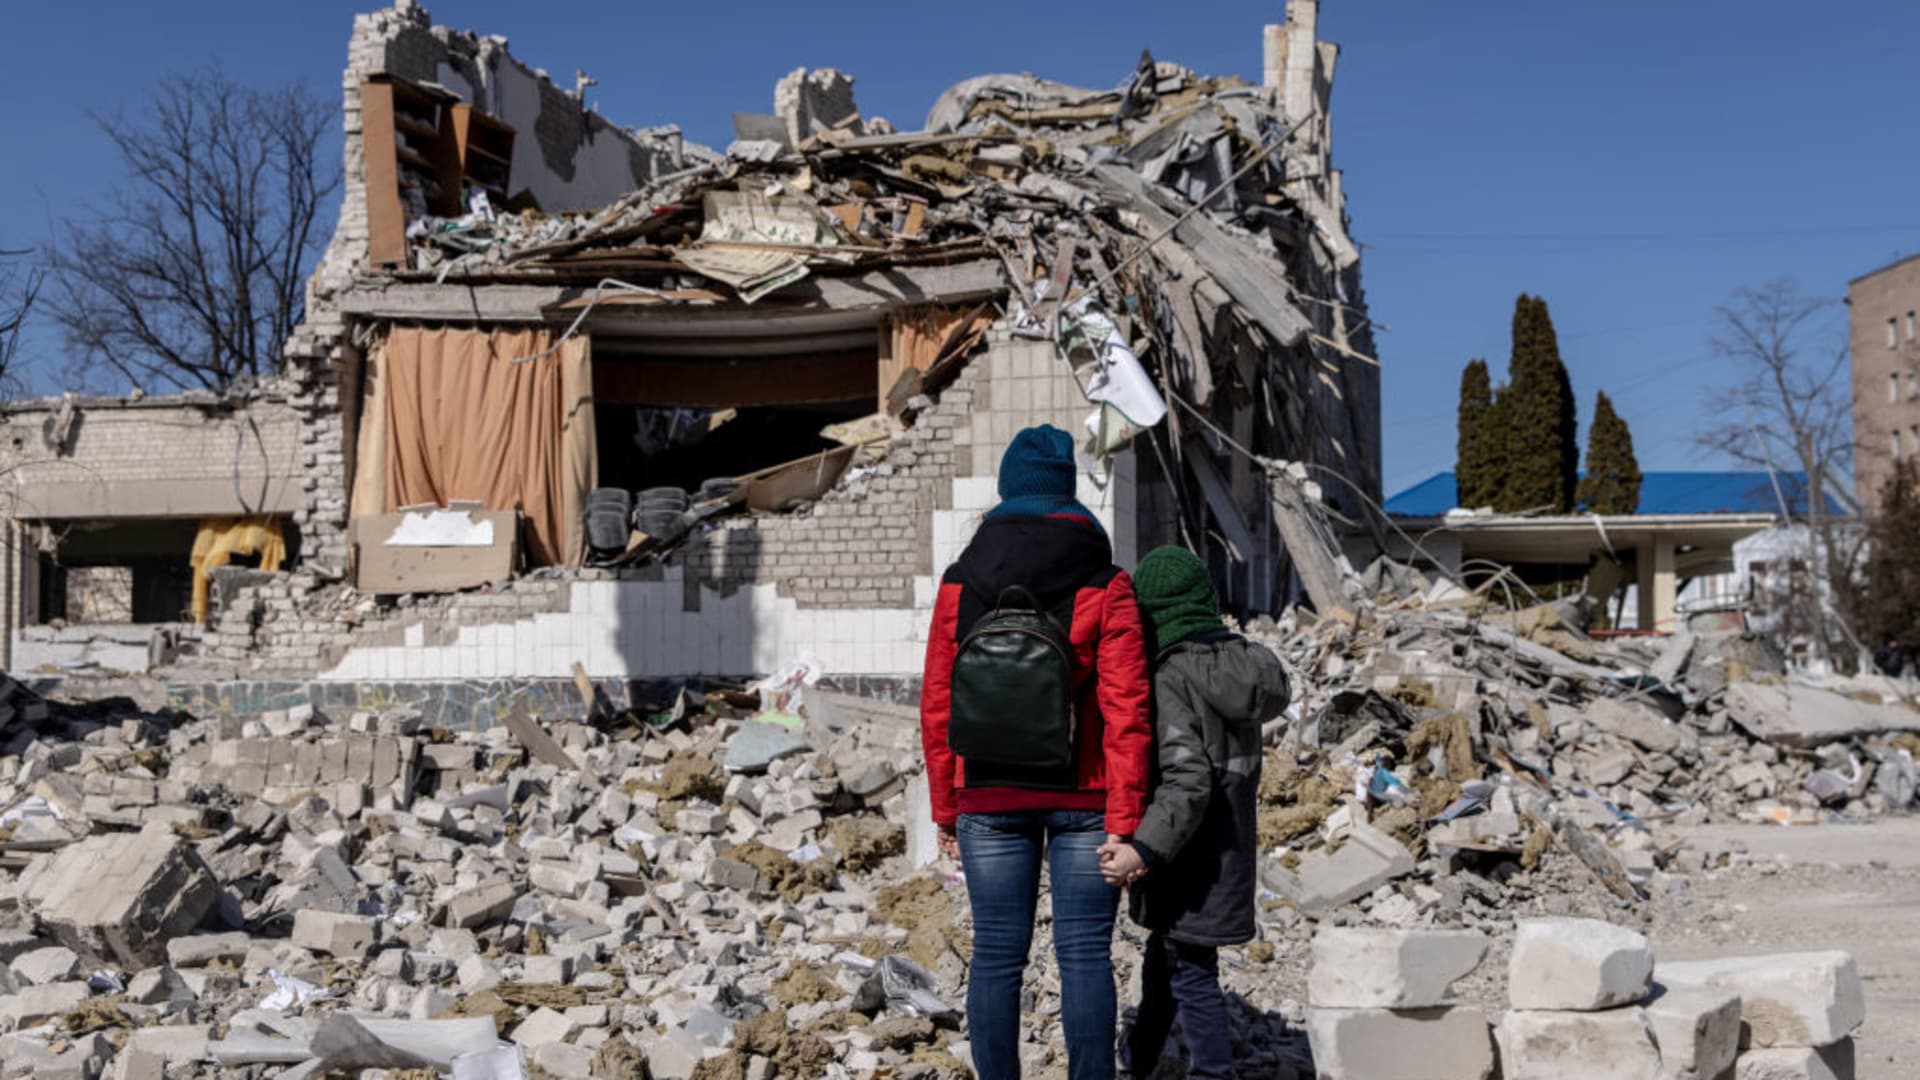 People look at damage at a school that was hit by a Russian attack ten days ago on March 20, 2022 in Zhytomyr, Ukraine.